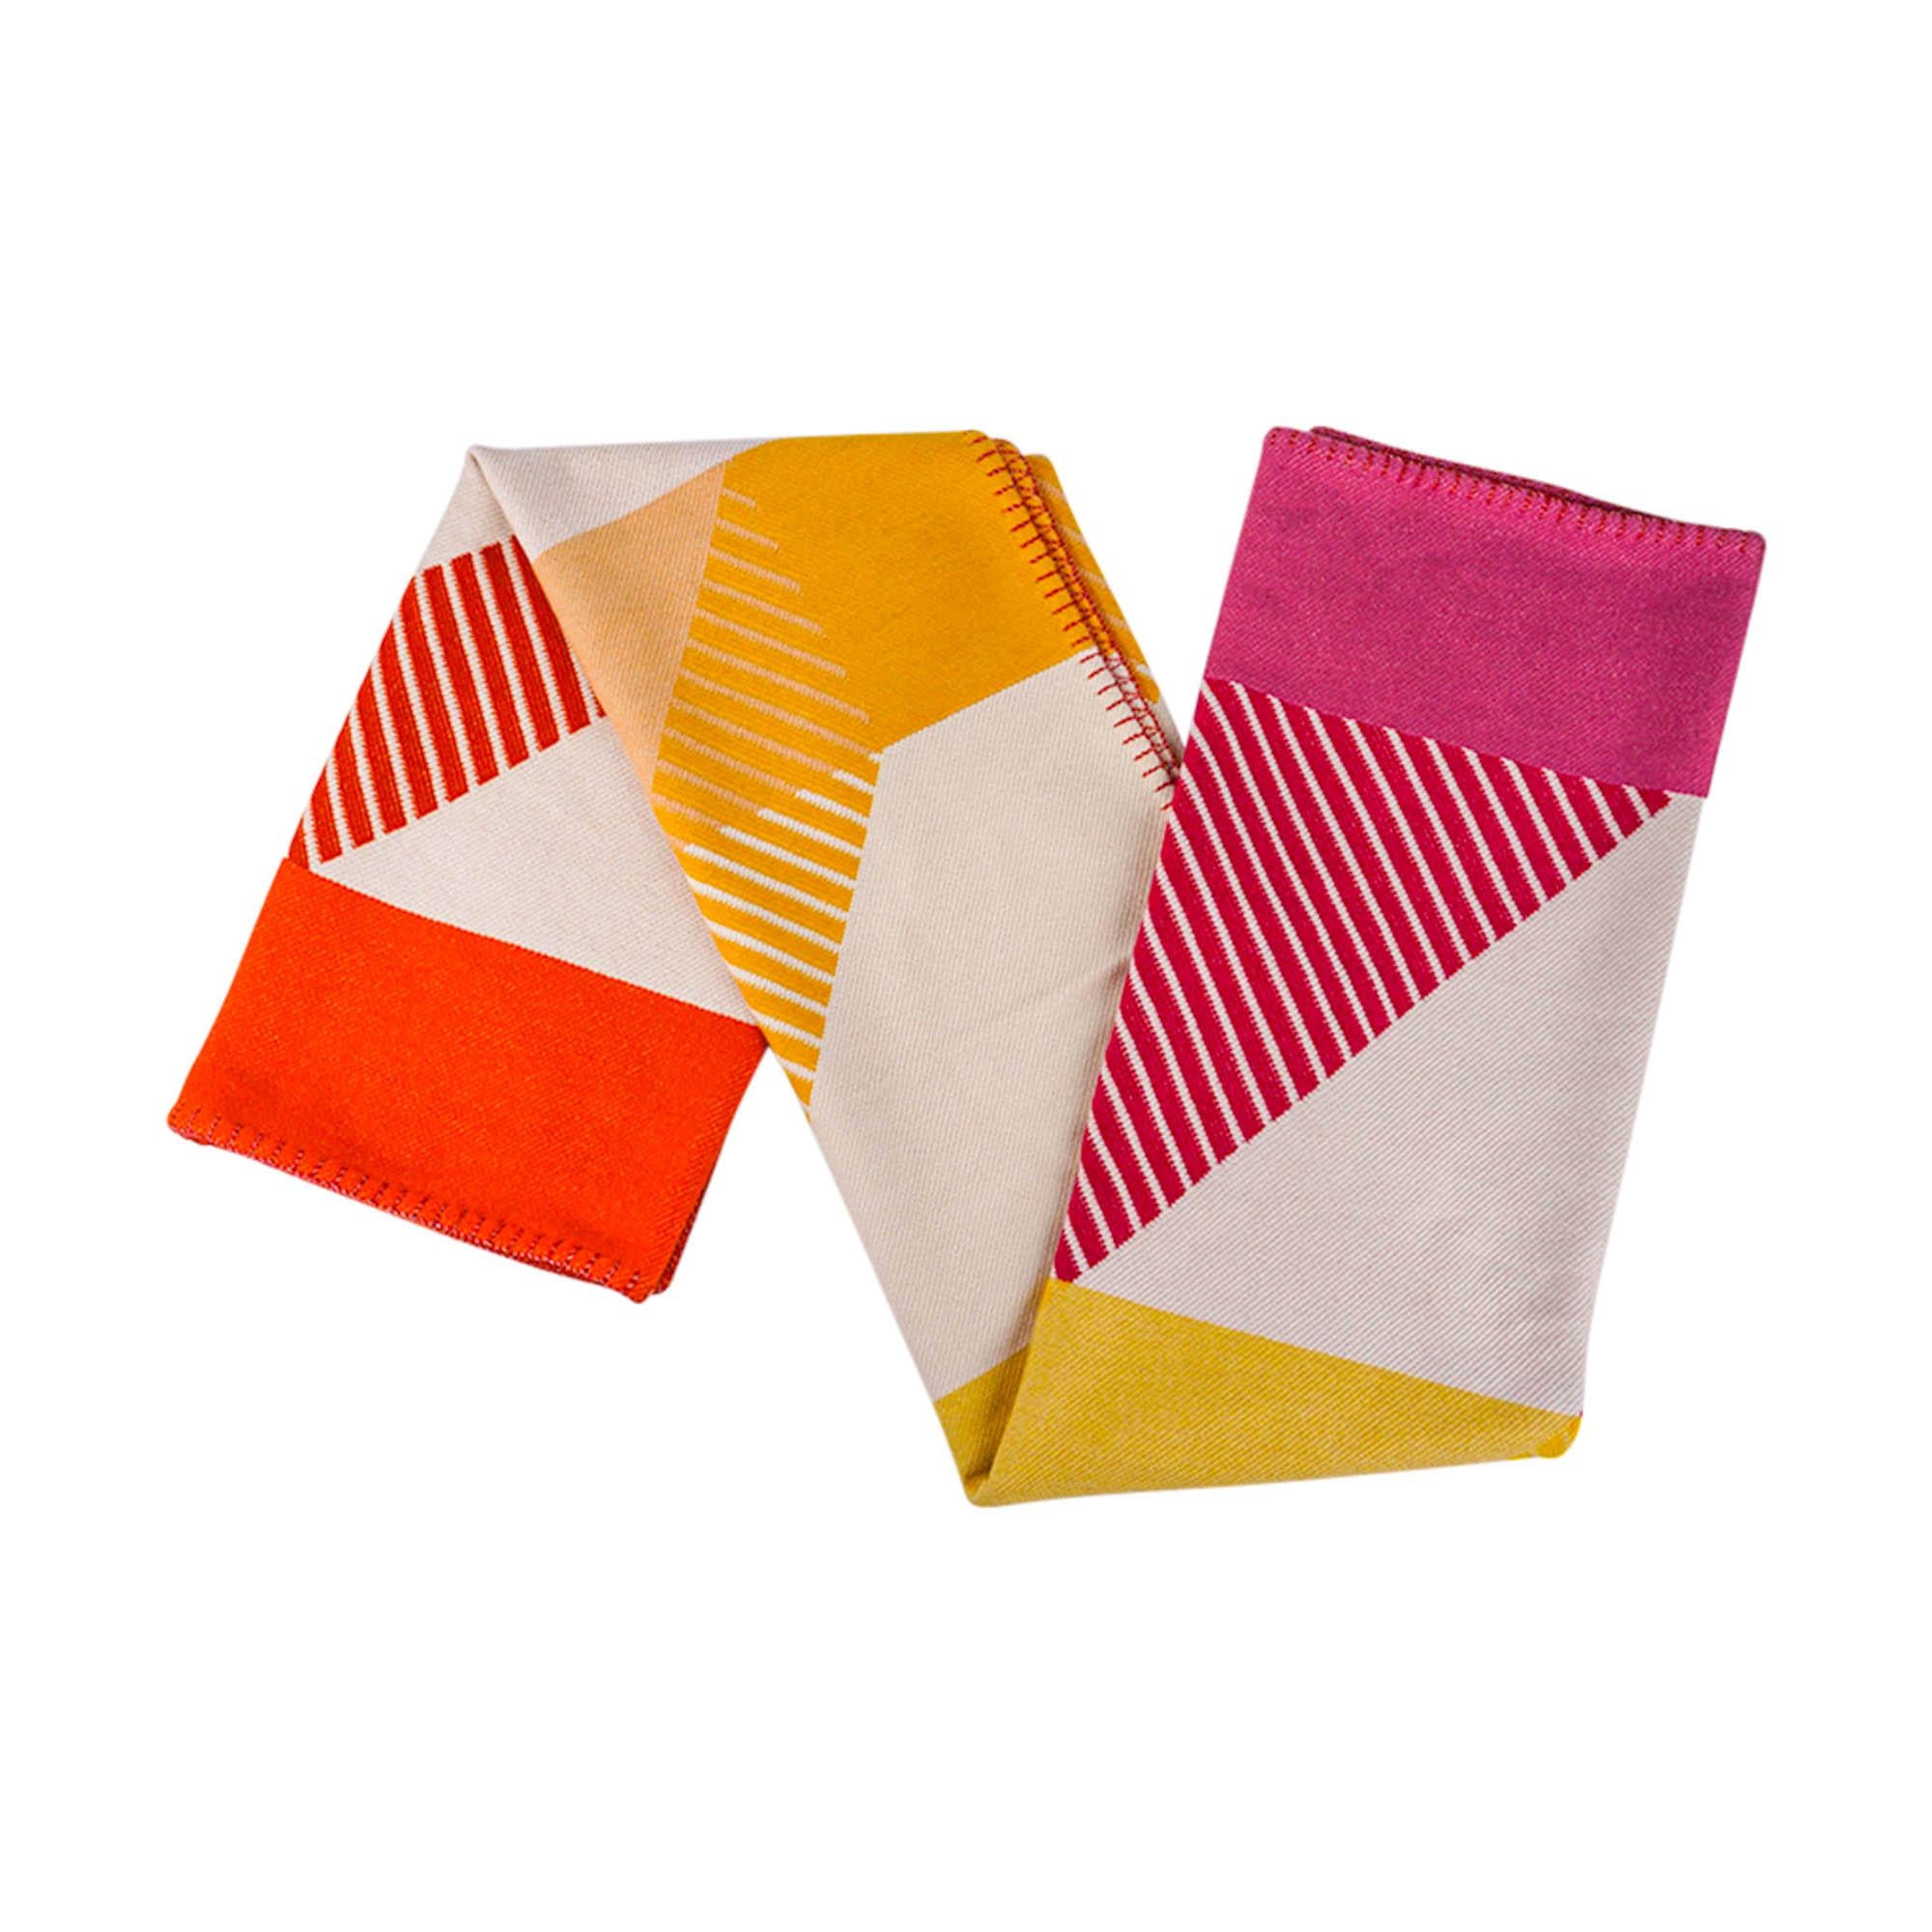 Mightychic offers an Hermes H Diagonale blanket featured in Petunia and Mandarine.
Inspired by a 1929 Hermes advertisement for male and female accessories.
The name H Diagonal comes from the Art Deco style of the ads original graphic design.
This